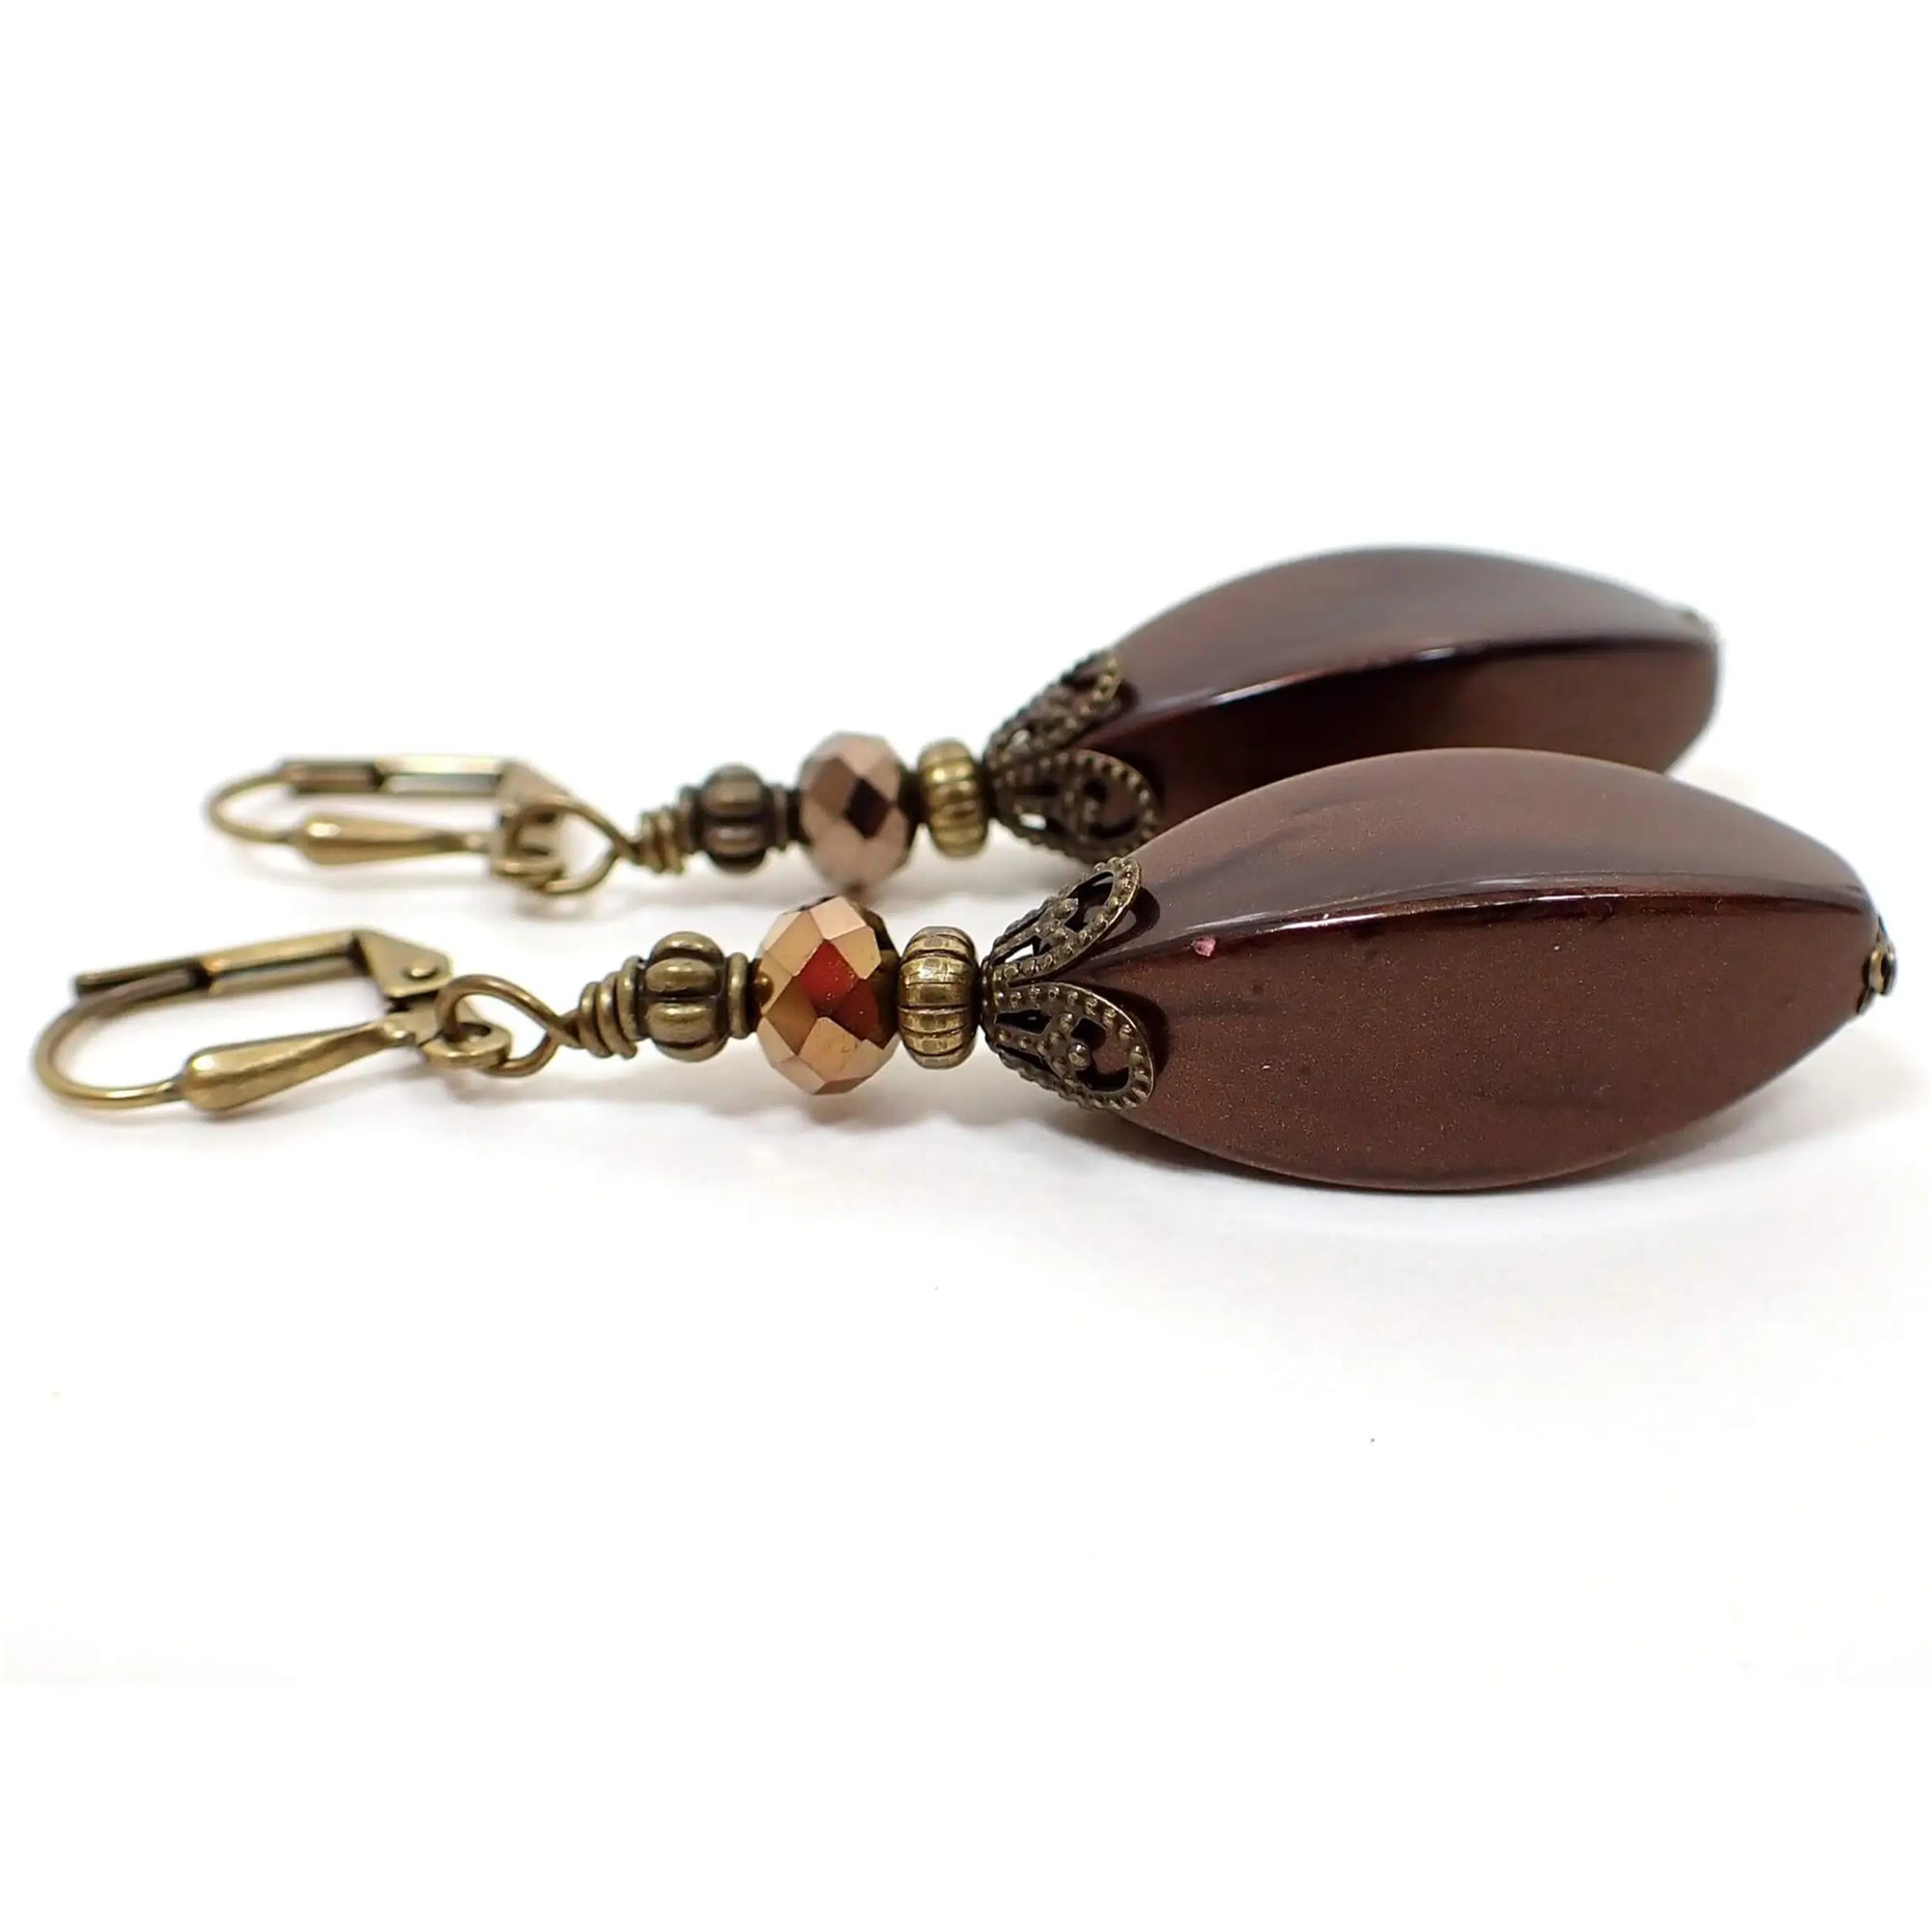 Side view of the handmade large brown drop earrings. The metal is antiqued brass in color. There are large vintage lucite beads at the bottom in pearly dark mocha brown color. The top glass crystal beads are faceted and metallic bronze in color.